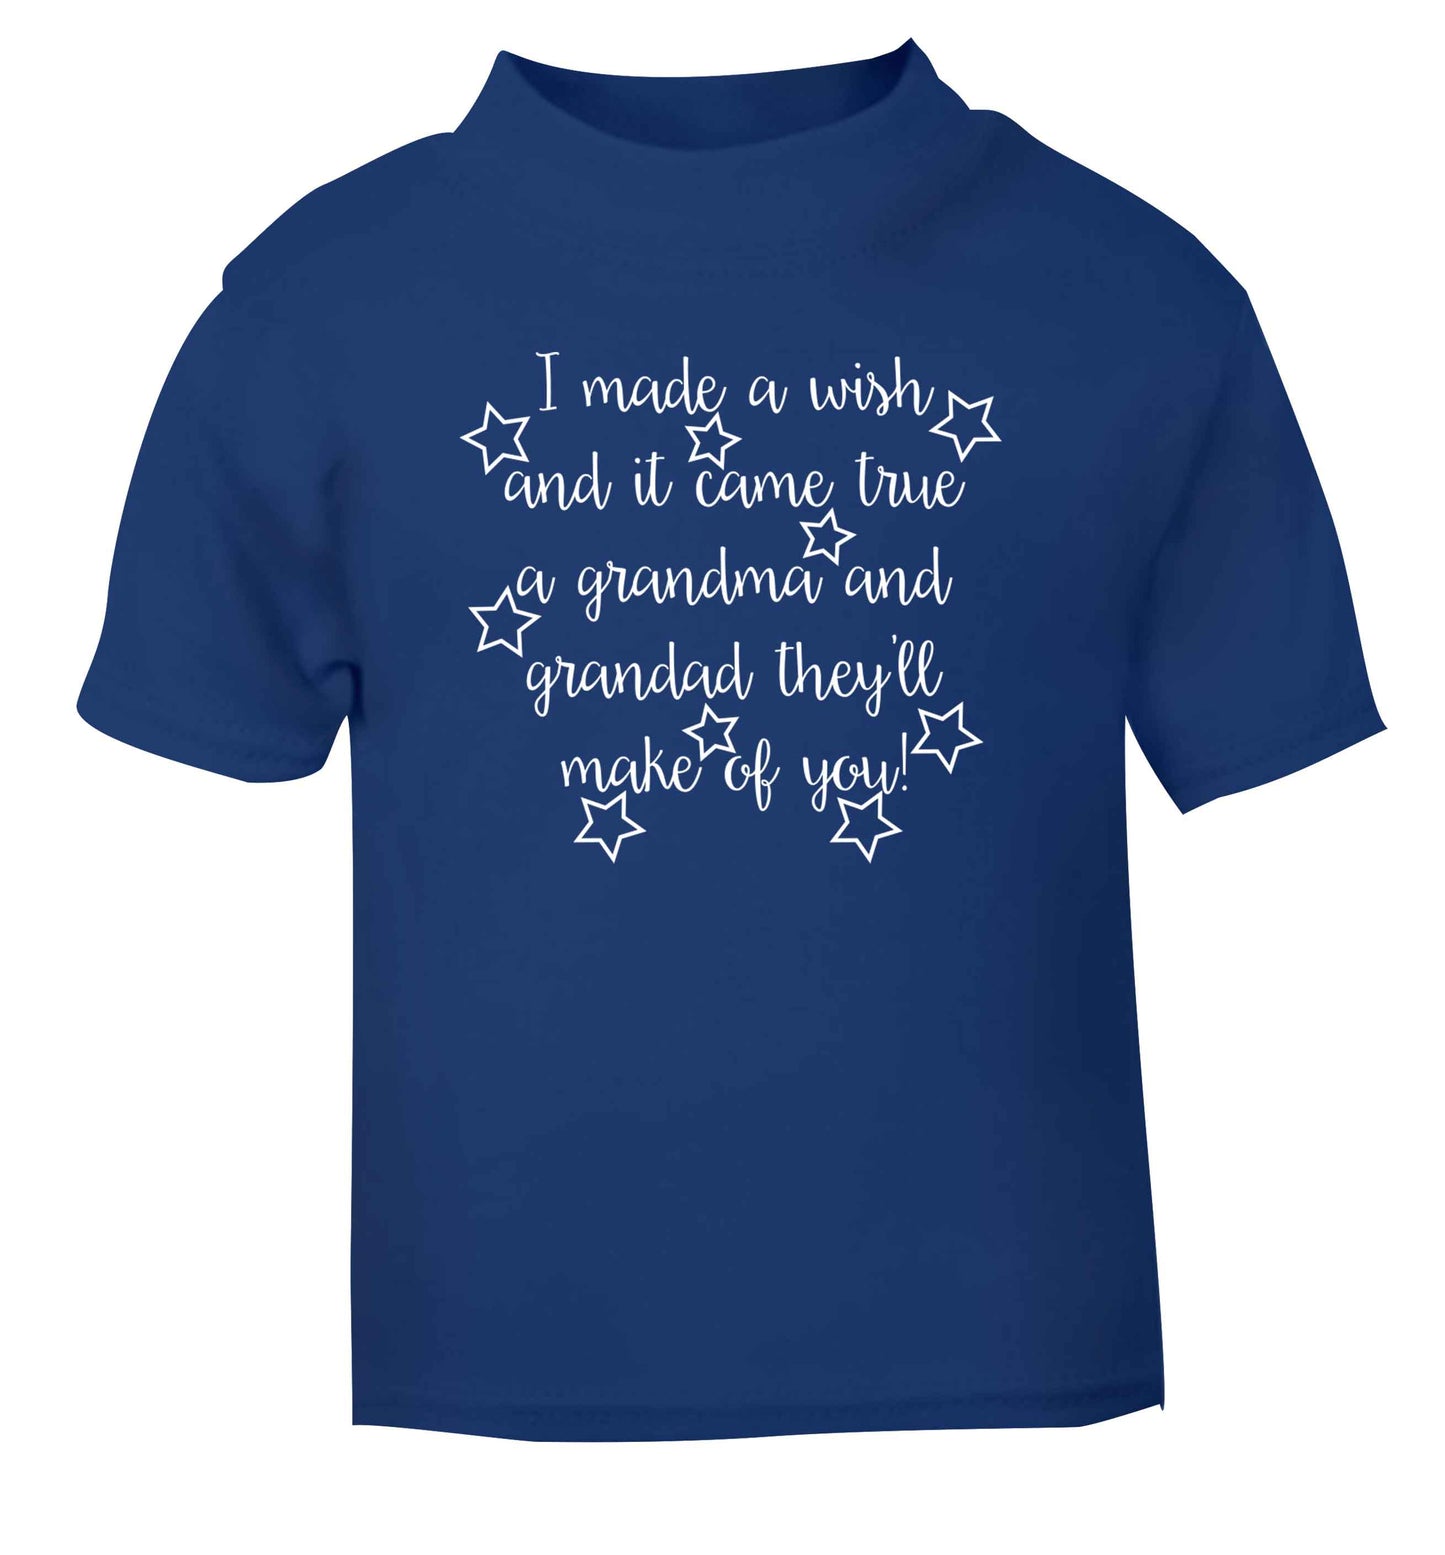 I made a wish and it came true a grandma and grandad they'll make of you! blue Baby Toddler Tshirt 2 Years